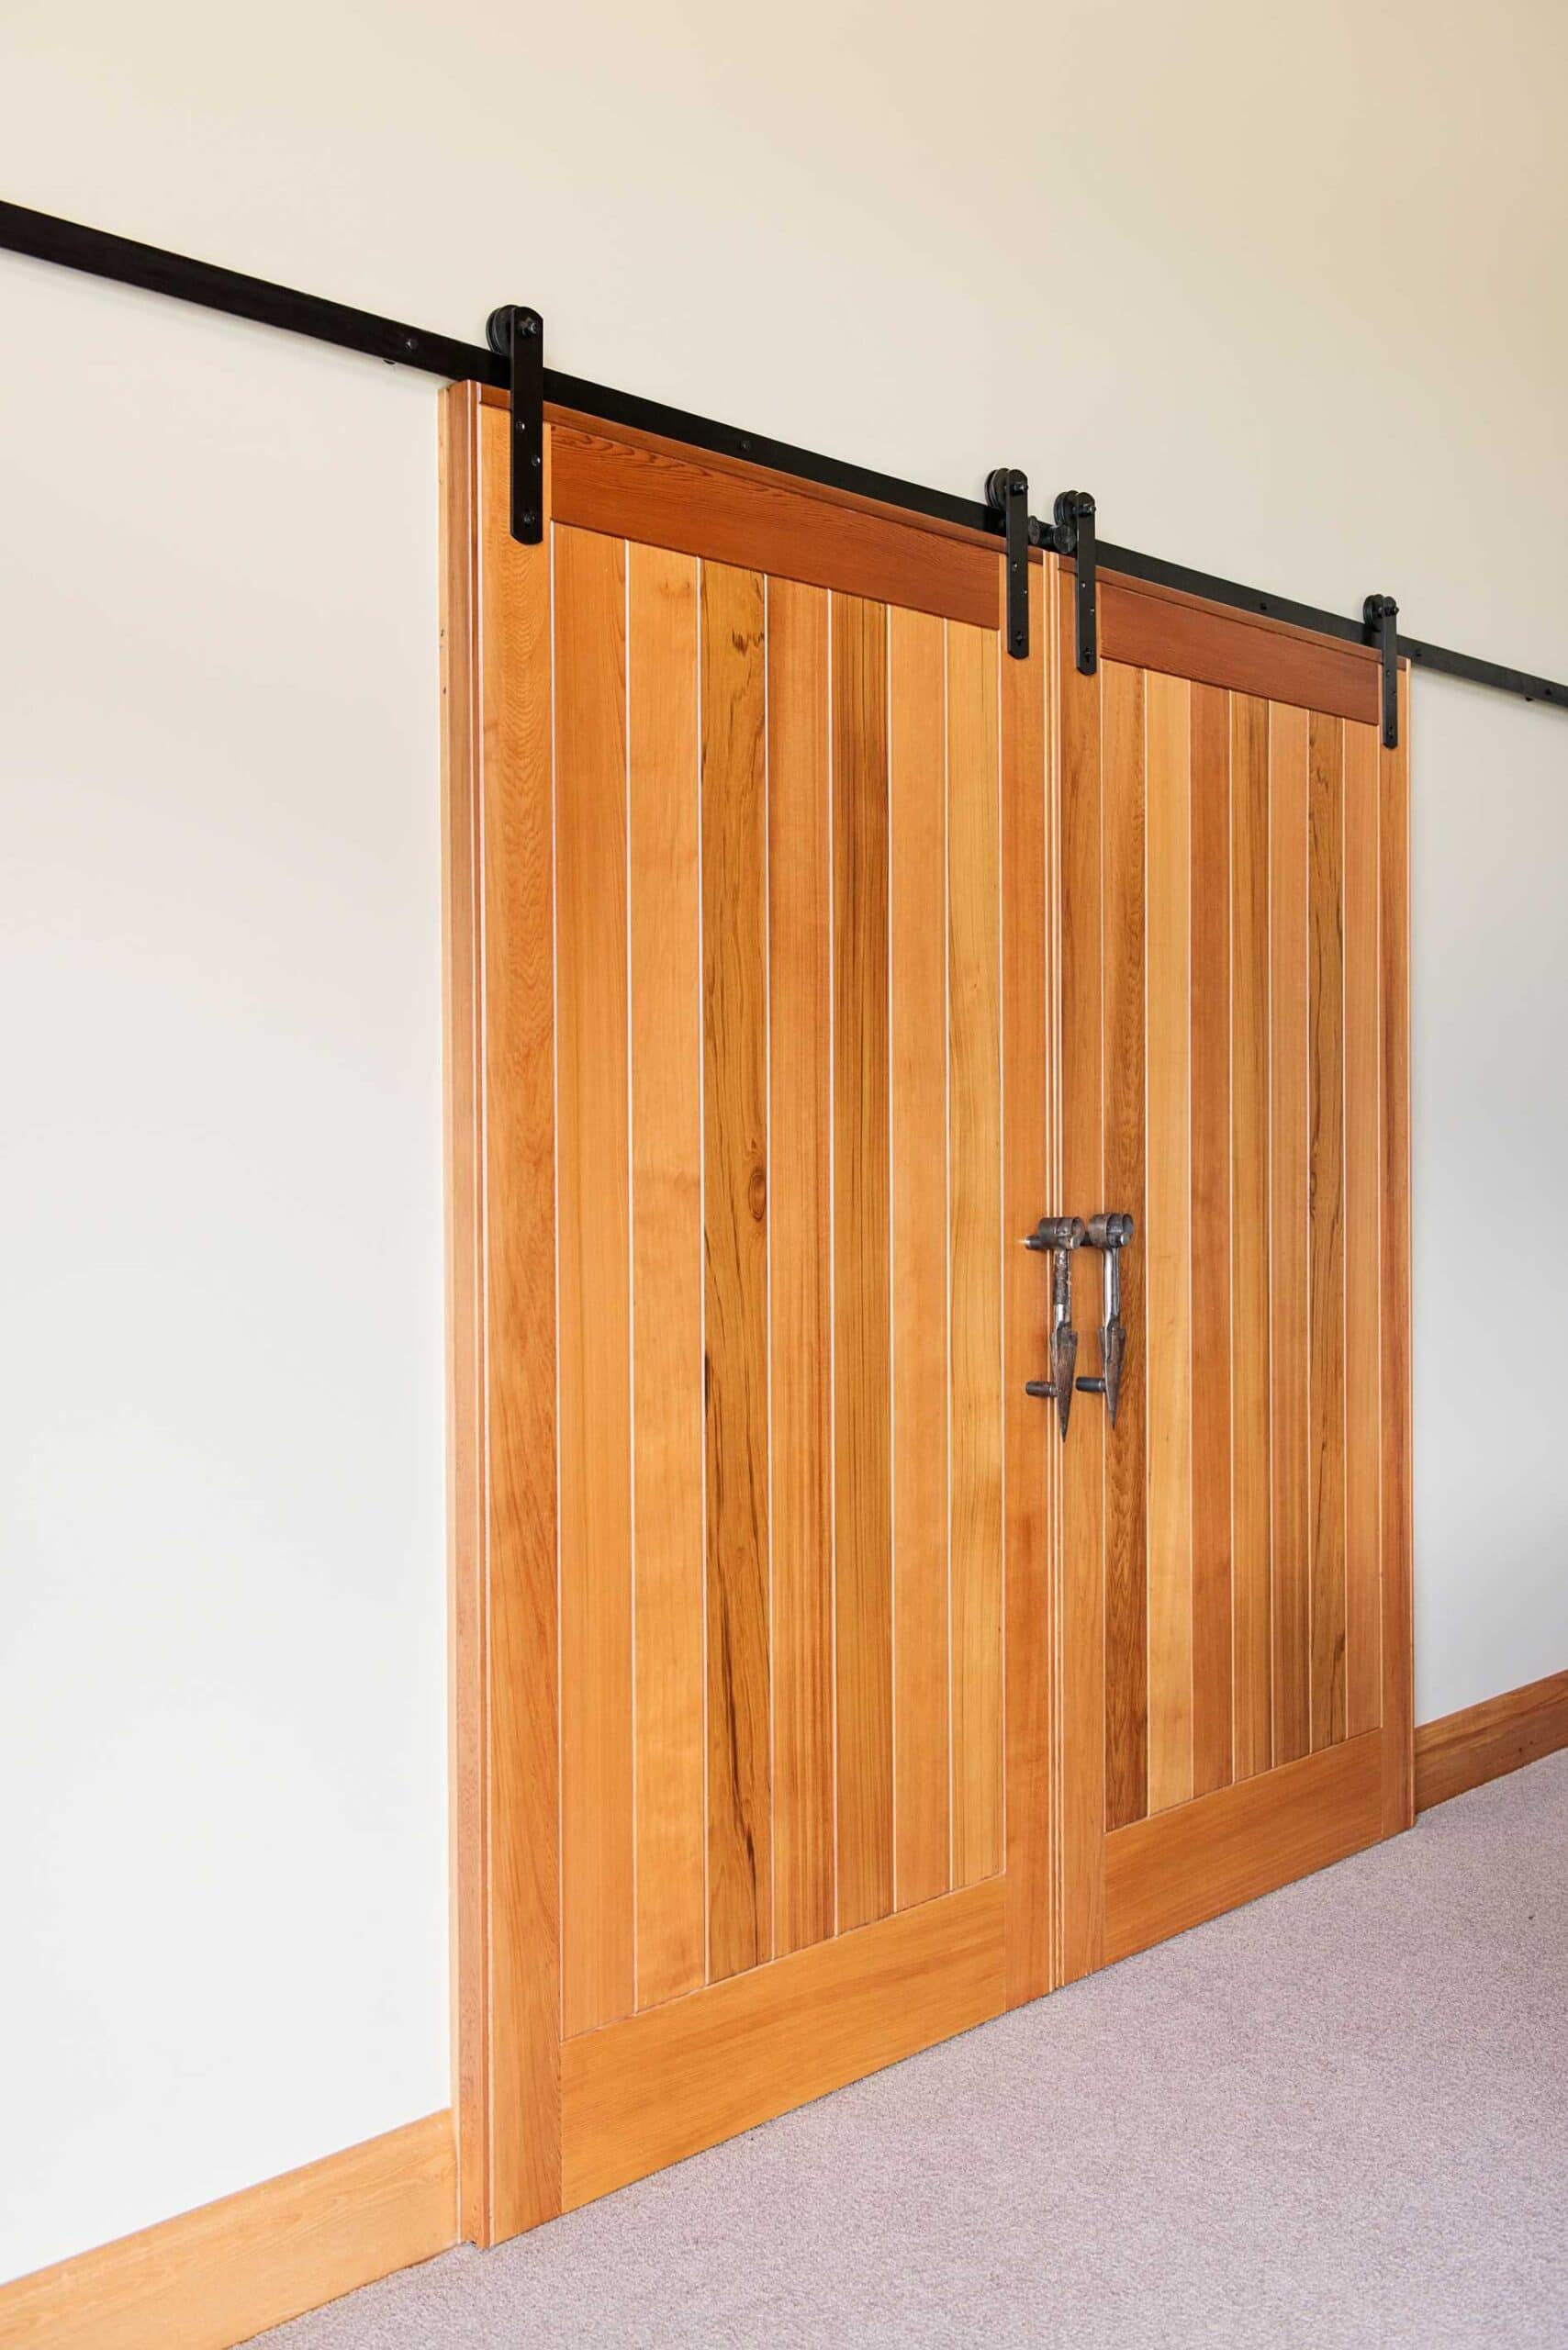  The timber for these sliding doors were chosen for their rustic style and colour.